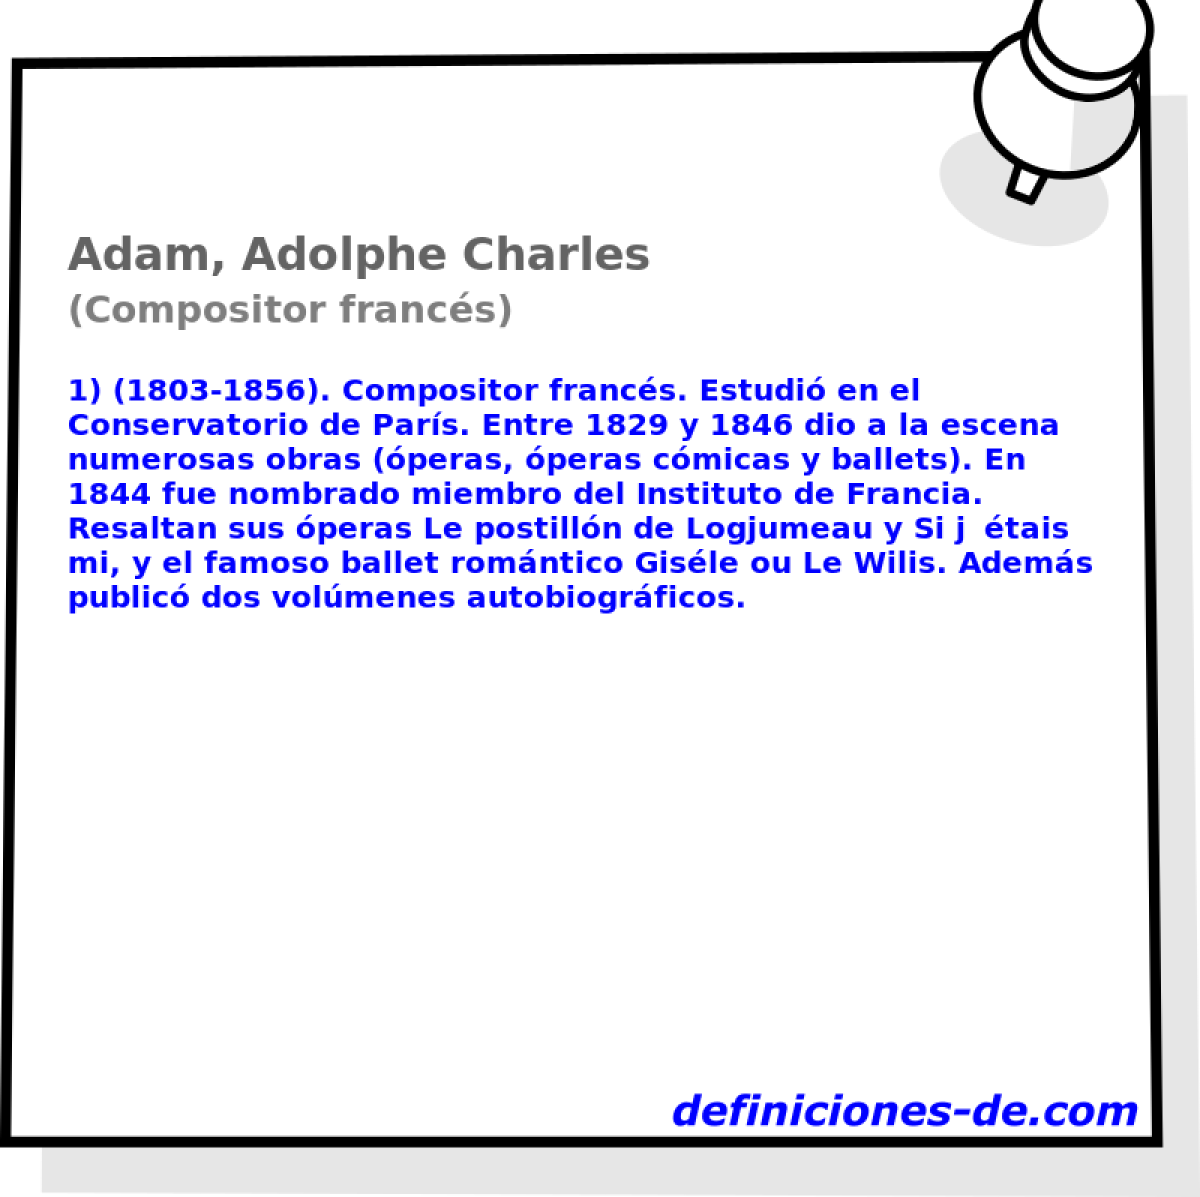 Adam, Adolphe Charles (Compositor francs)